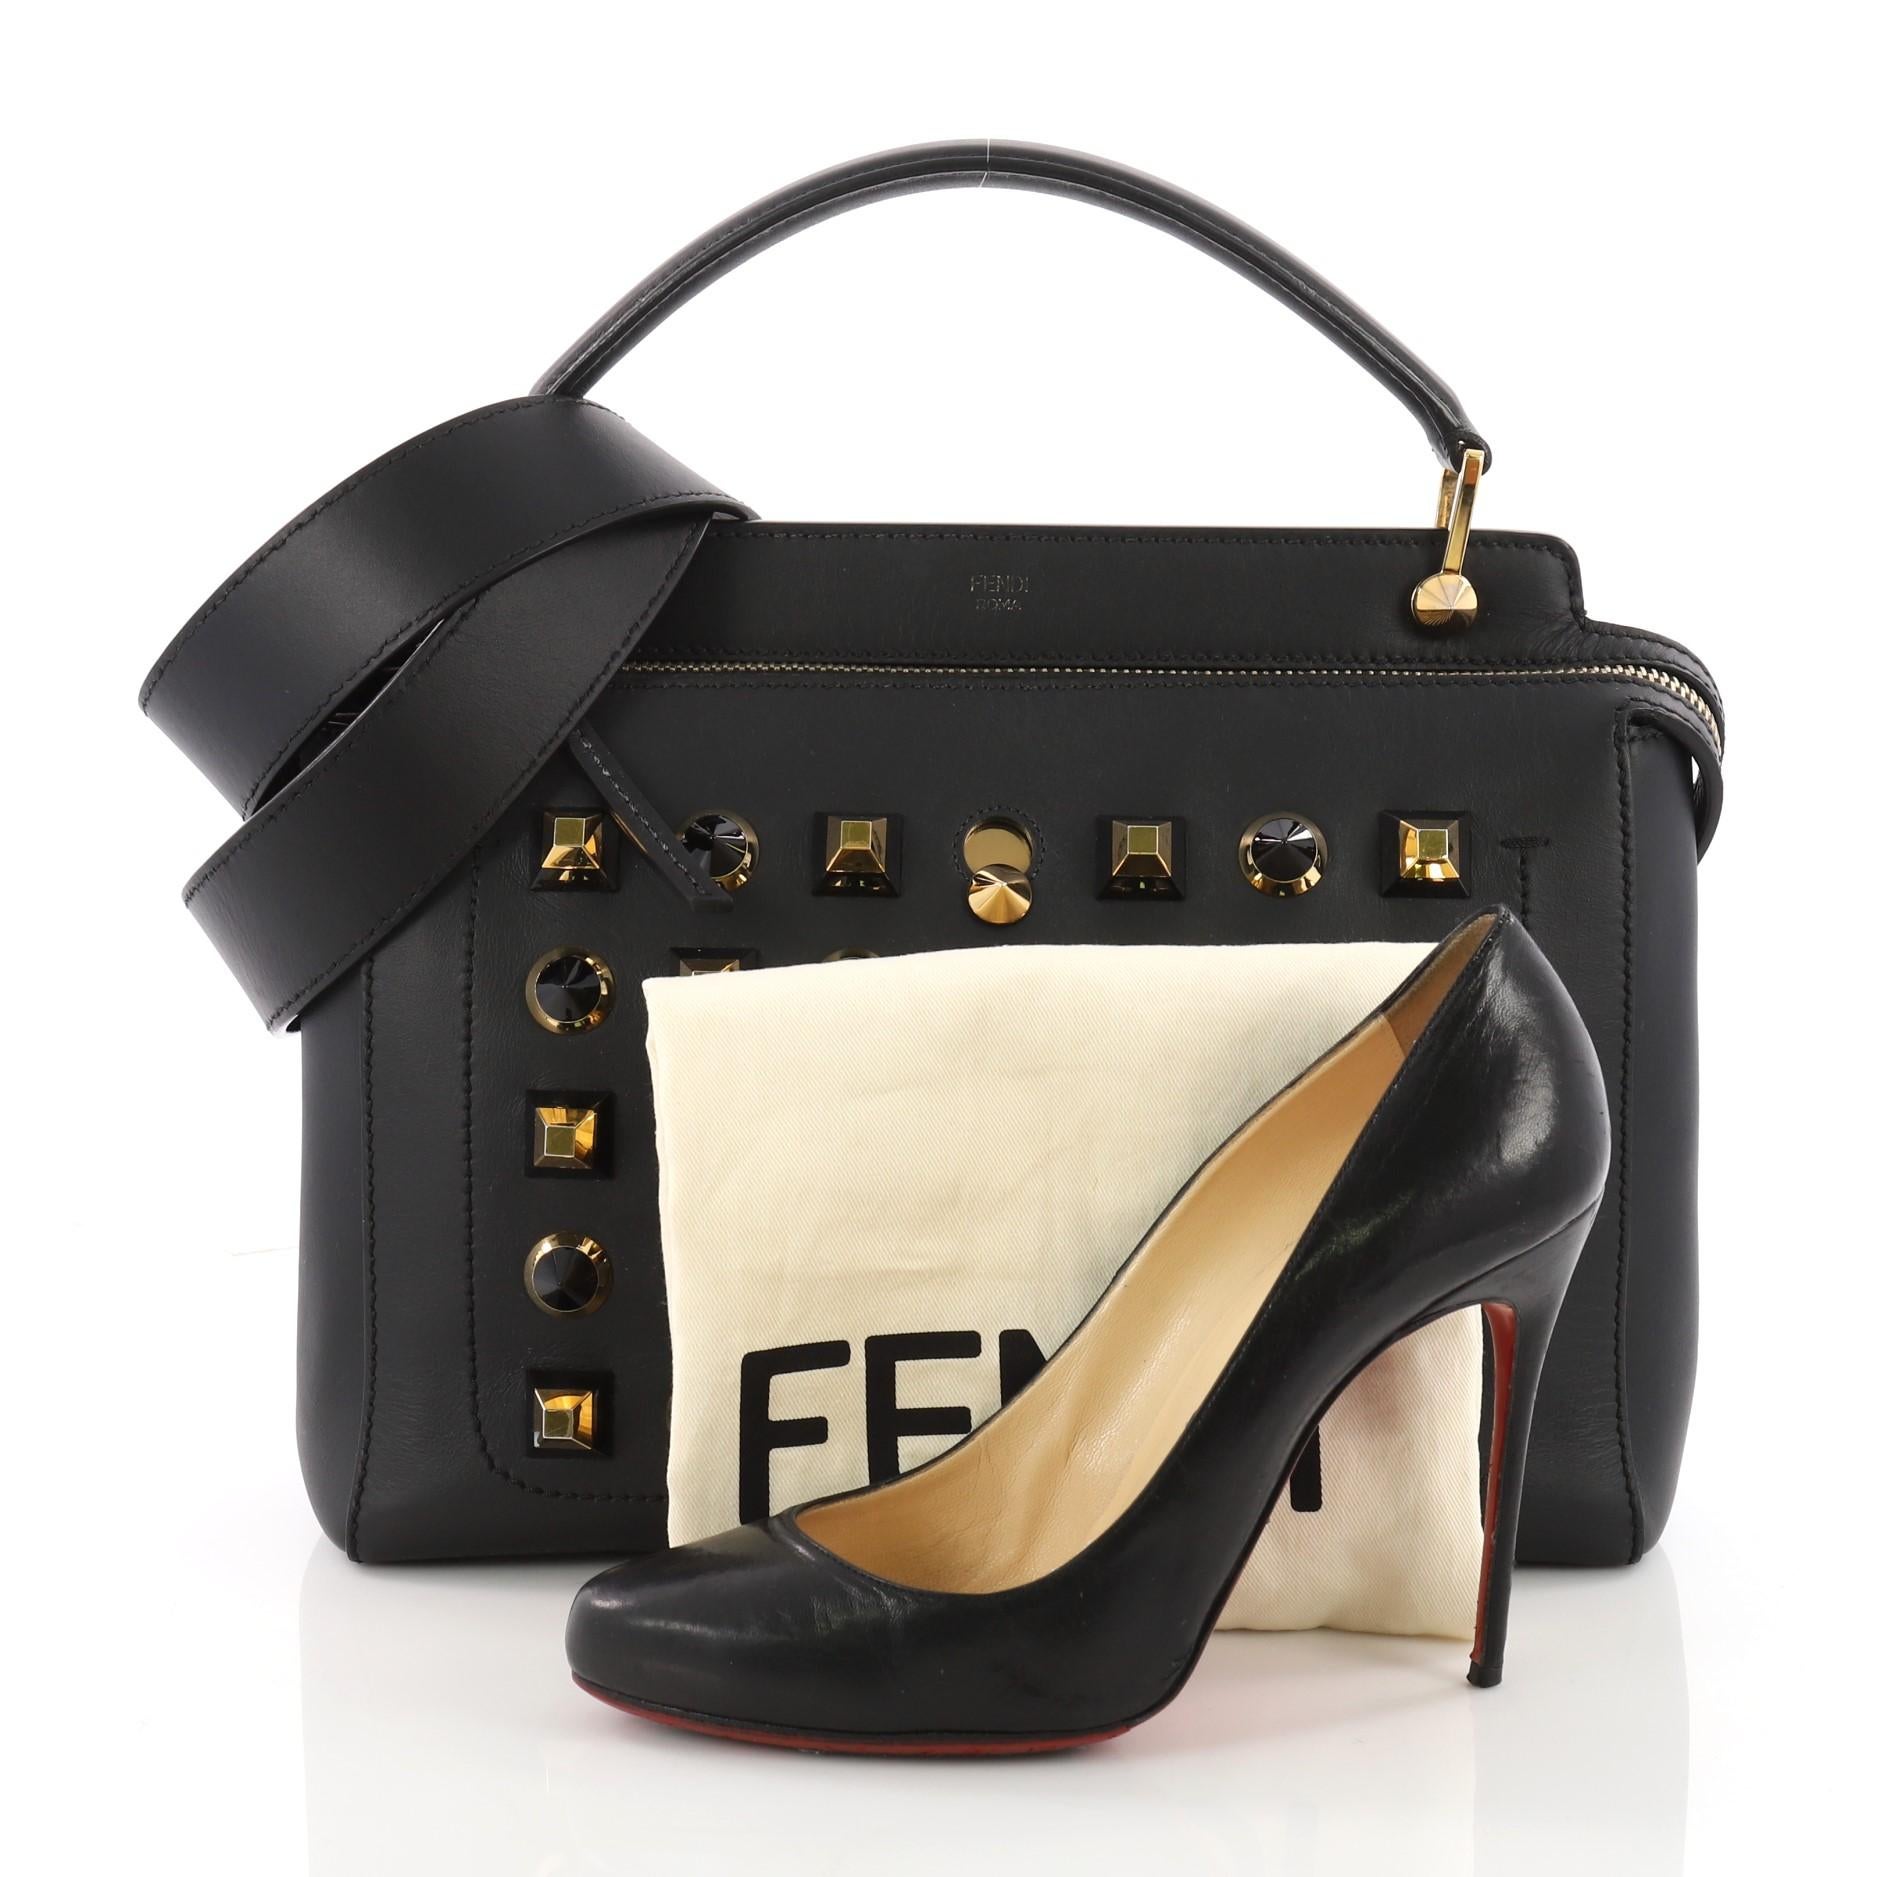 This authentic Fendi DotCom Convertible Satchel Studded Leather Medium is a chic and minimalist bag perfect for your everyday looks. Crafted from black leather, this playful satchel features a flat top handle, multiple stud detailing, distinctive